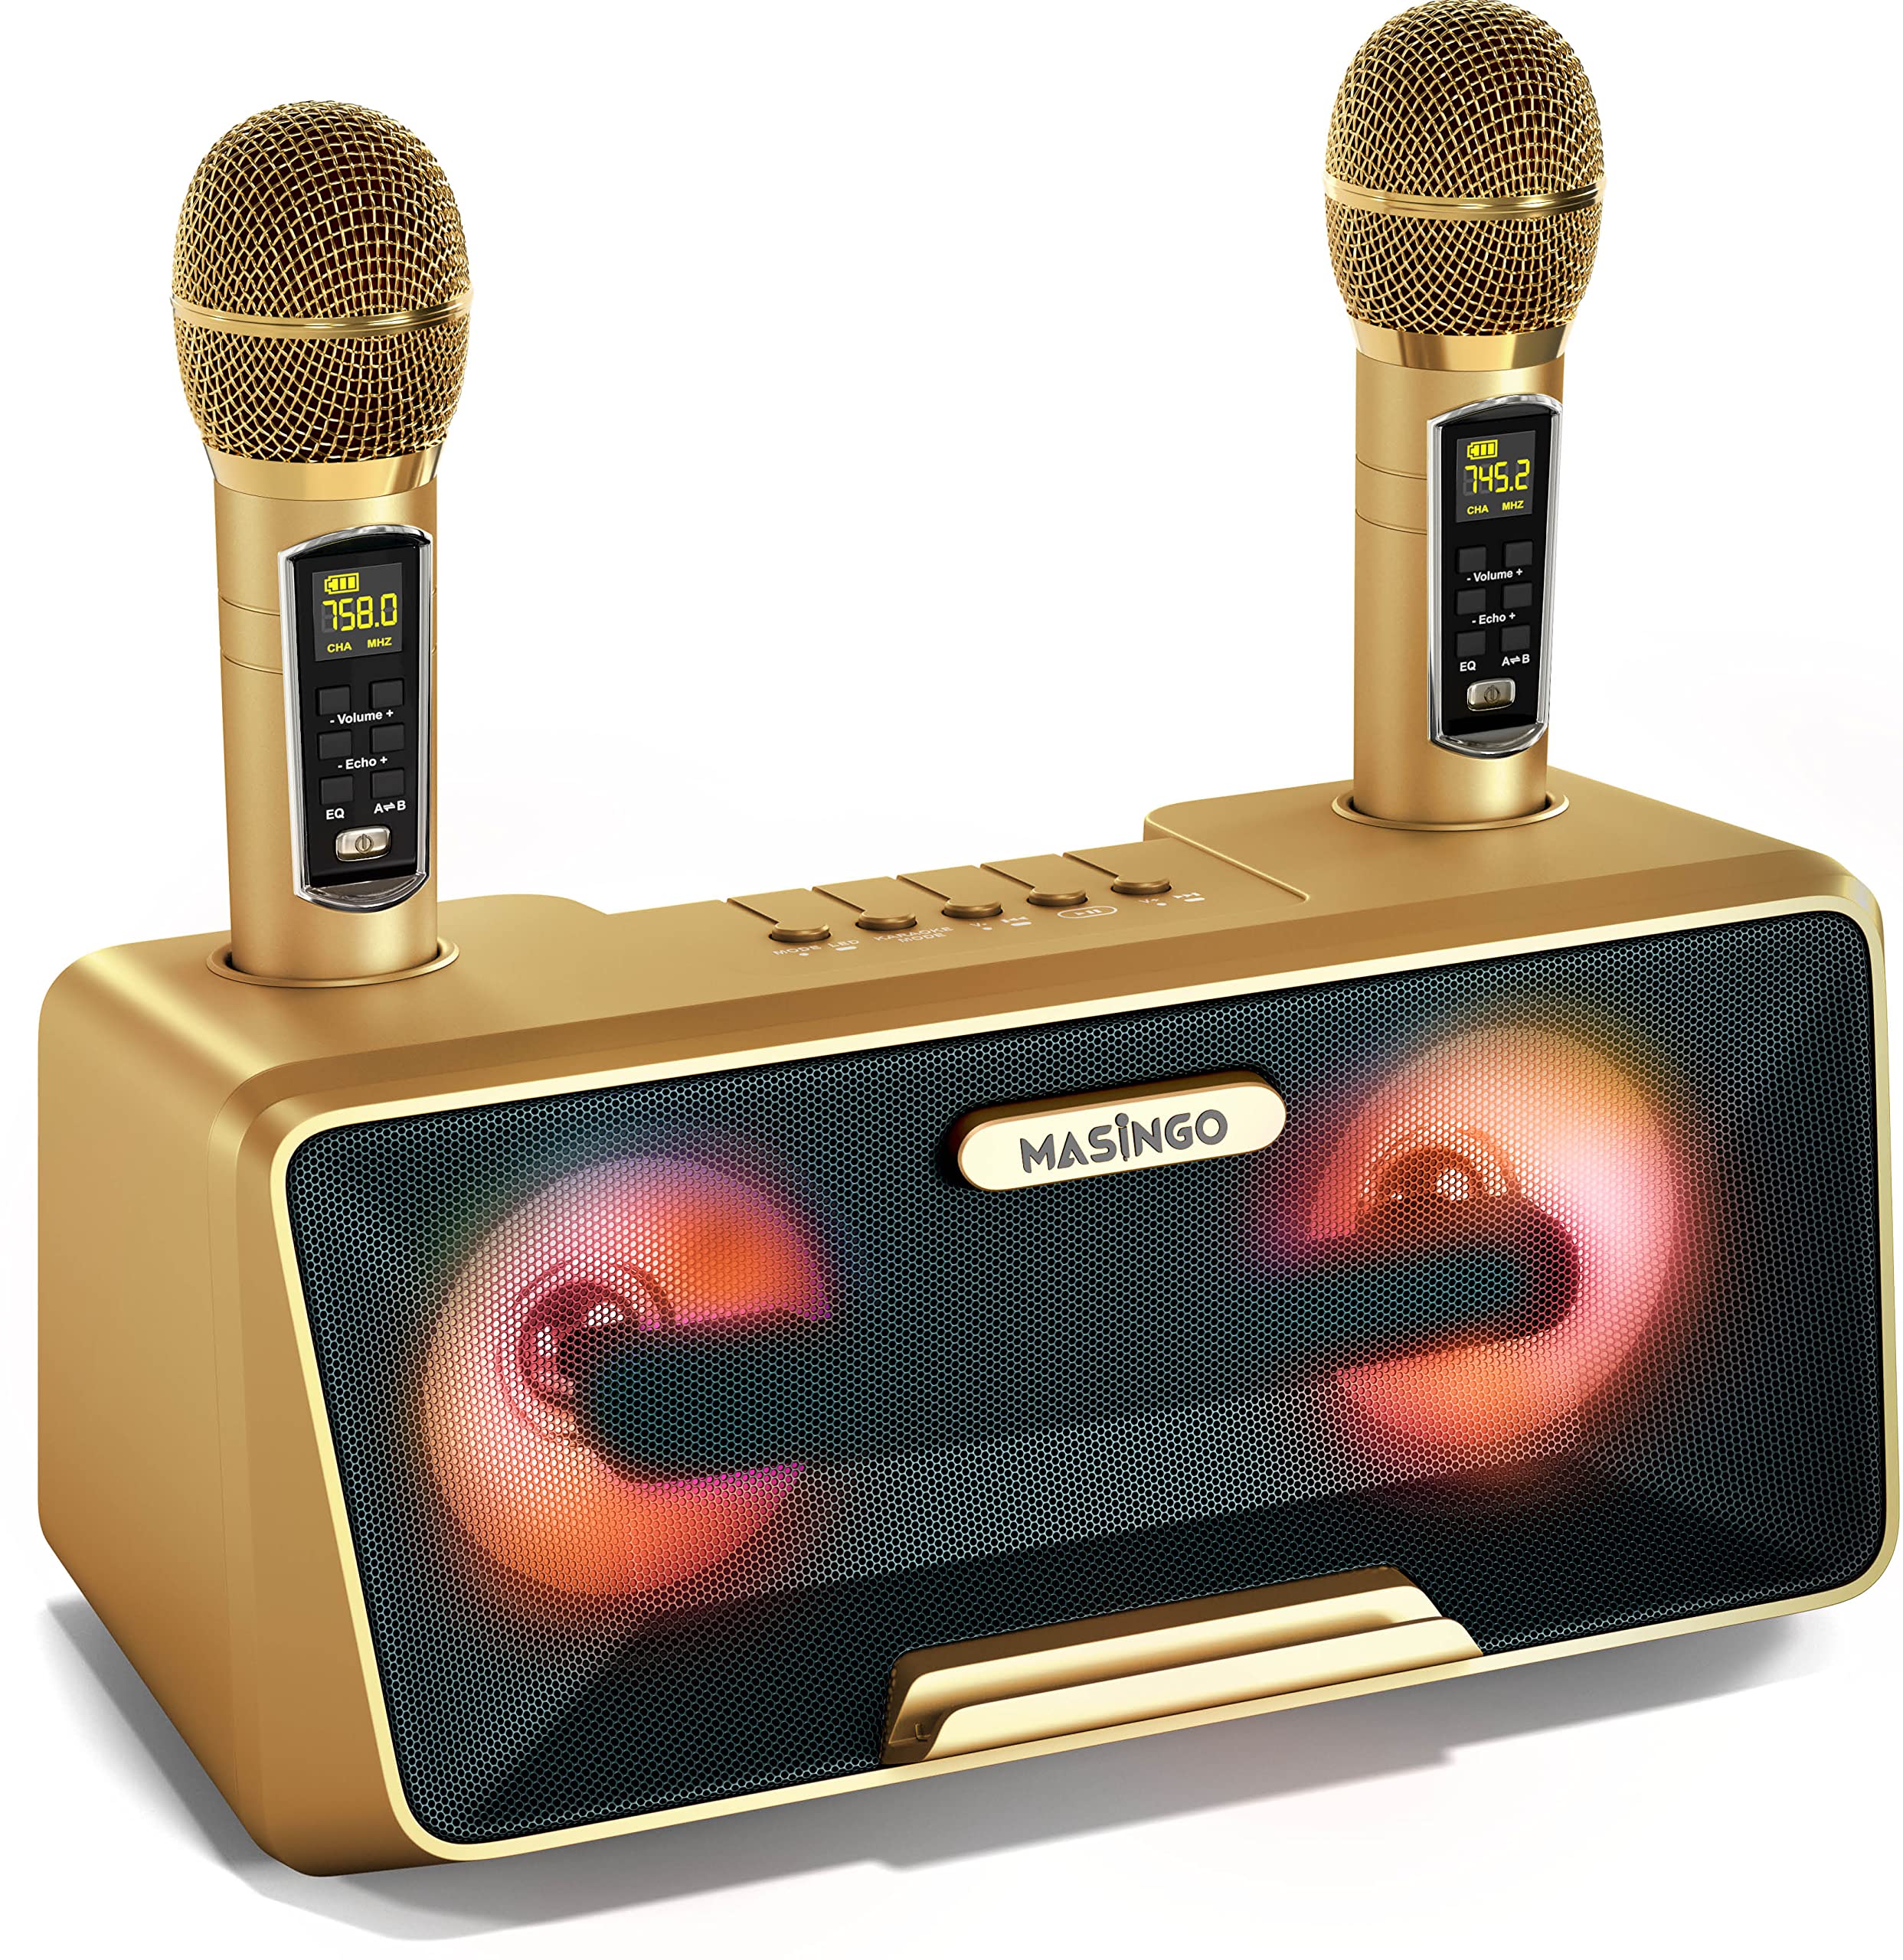 MASINGO Karaoke Machine for Adults and Kids with 2 Wireless Microphones, Portable Bluetooth Singing Speaker, Colorful LED Lights, PA System, Lyrics Display Holder, and TV Cable. Presto G2  - Like New